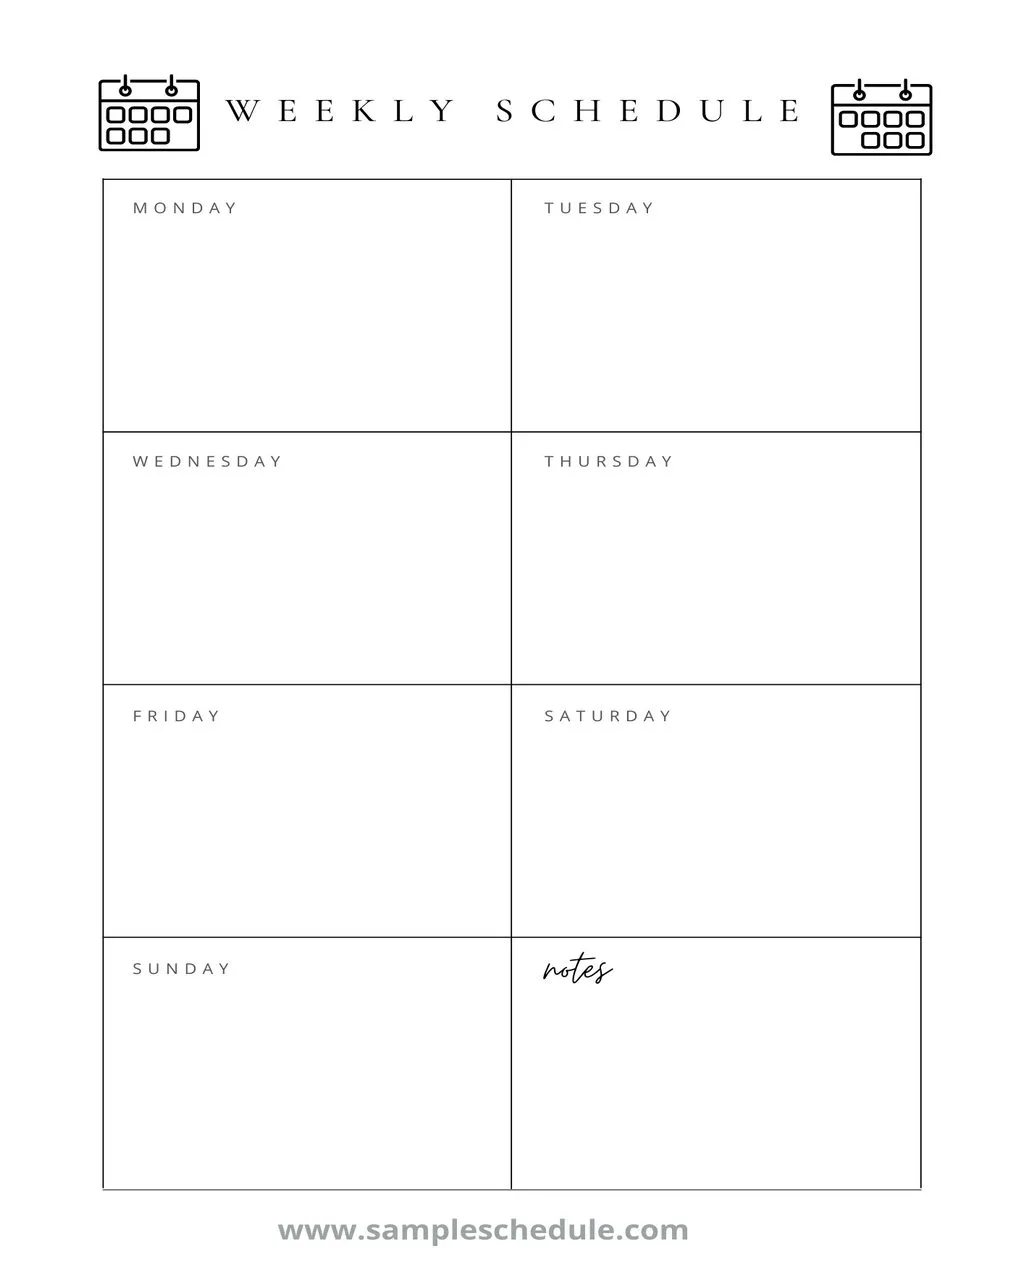 Weekly Schedule Template 11